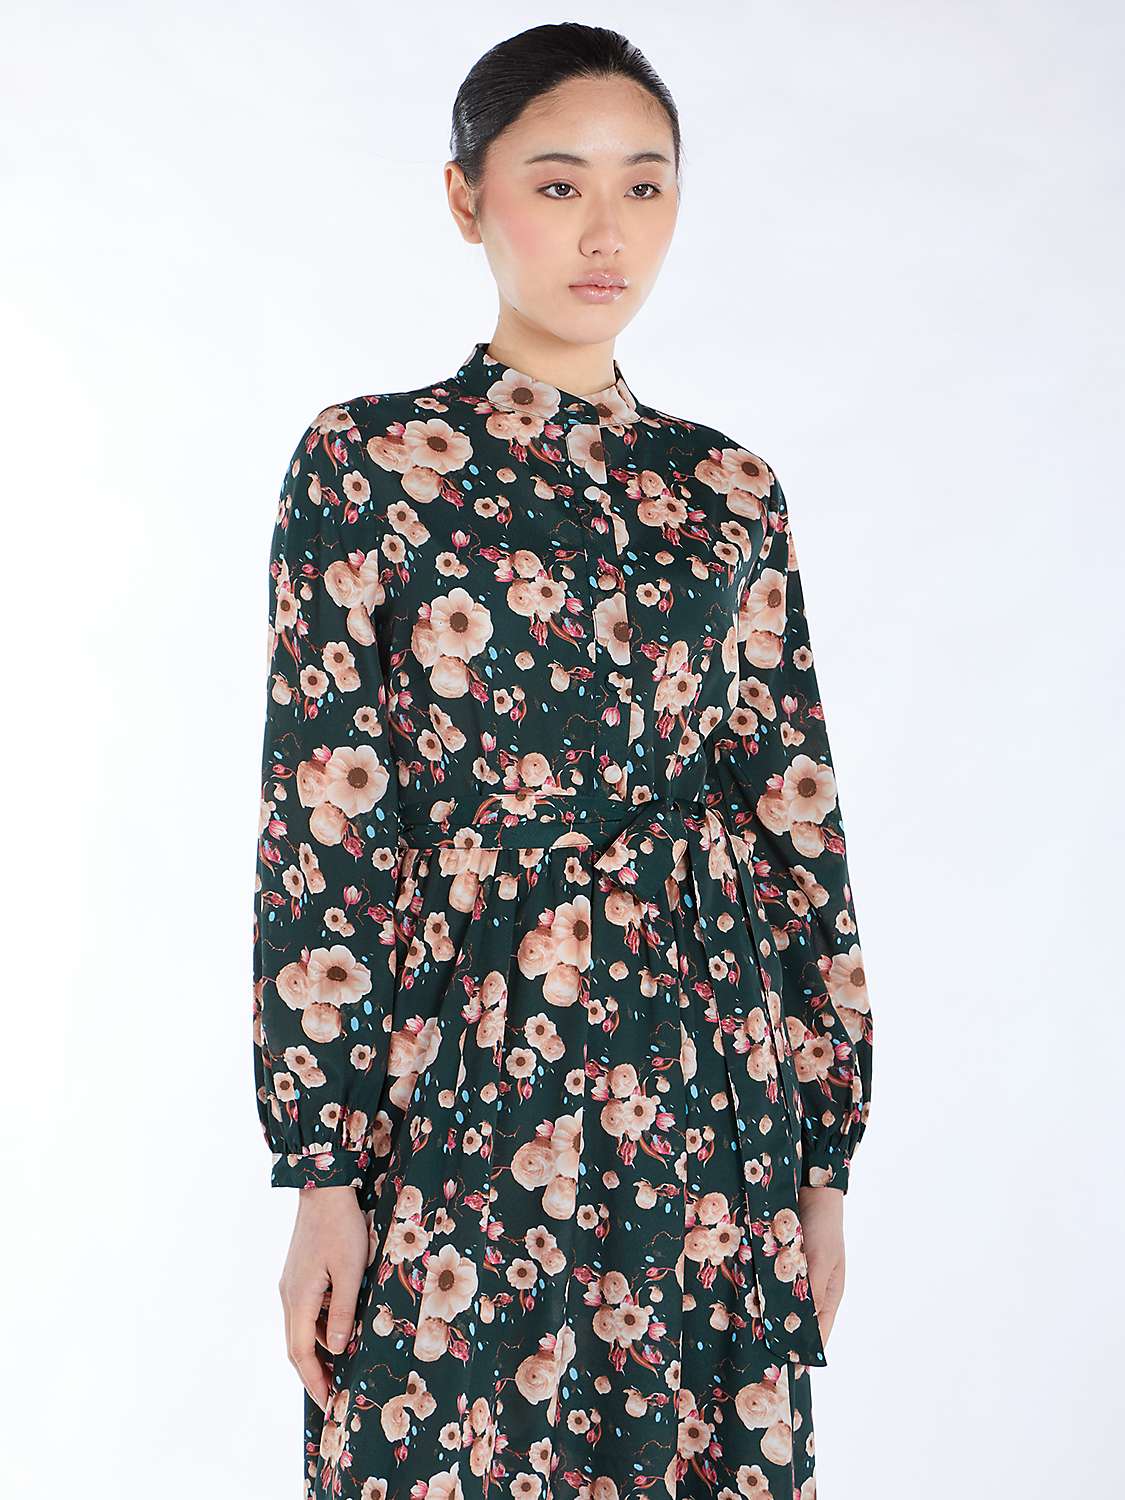 Buy Aab Cosmos Floral Print Maxi Dress, Green/Multi Online at johnlewis.com